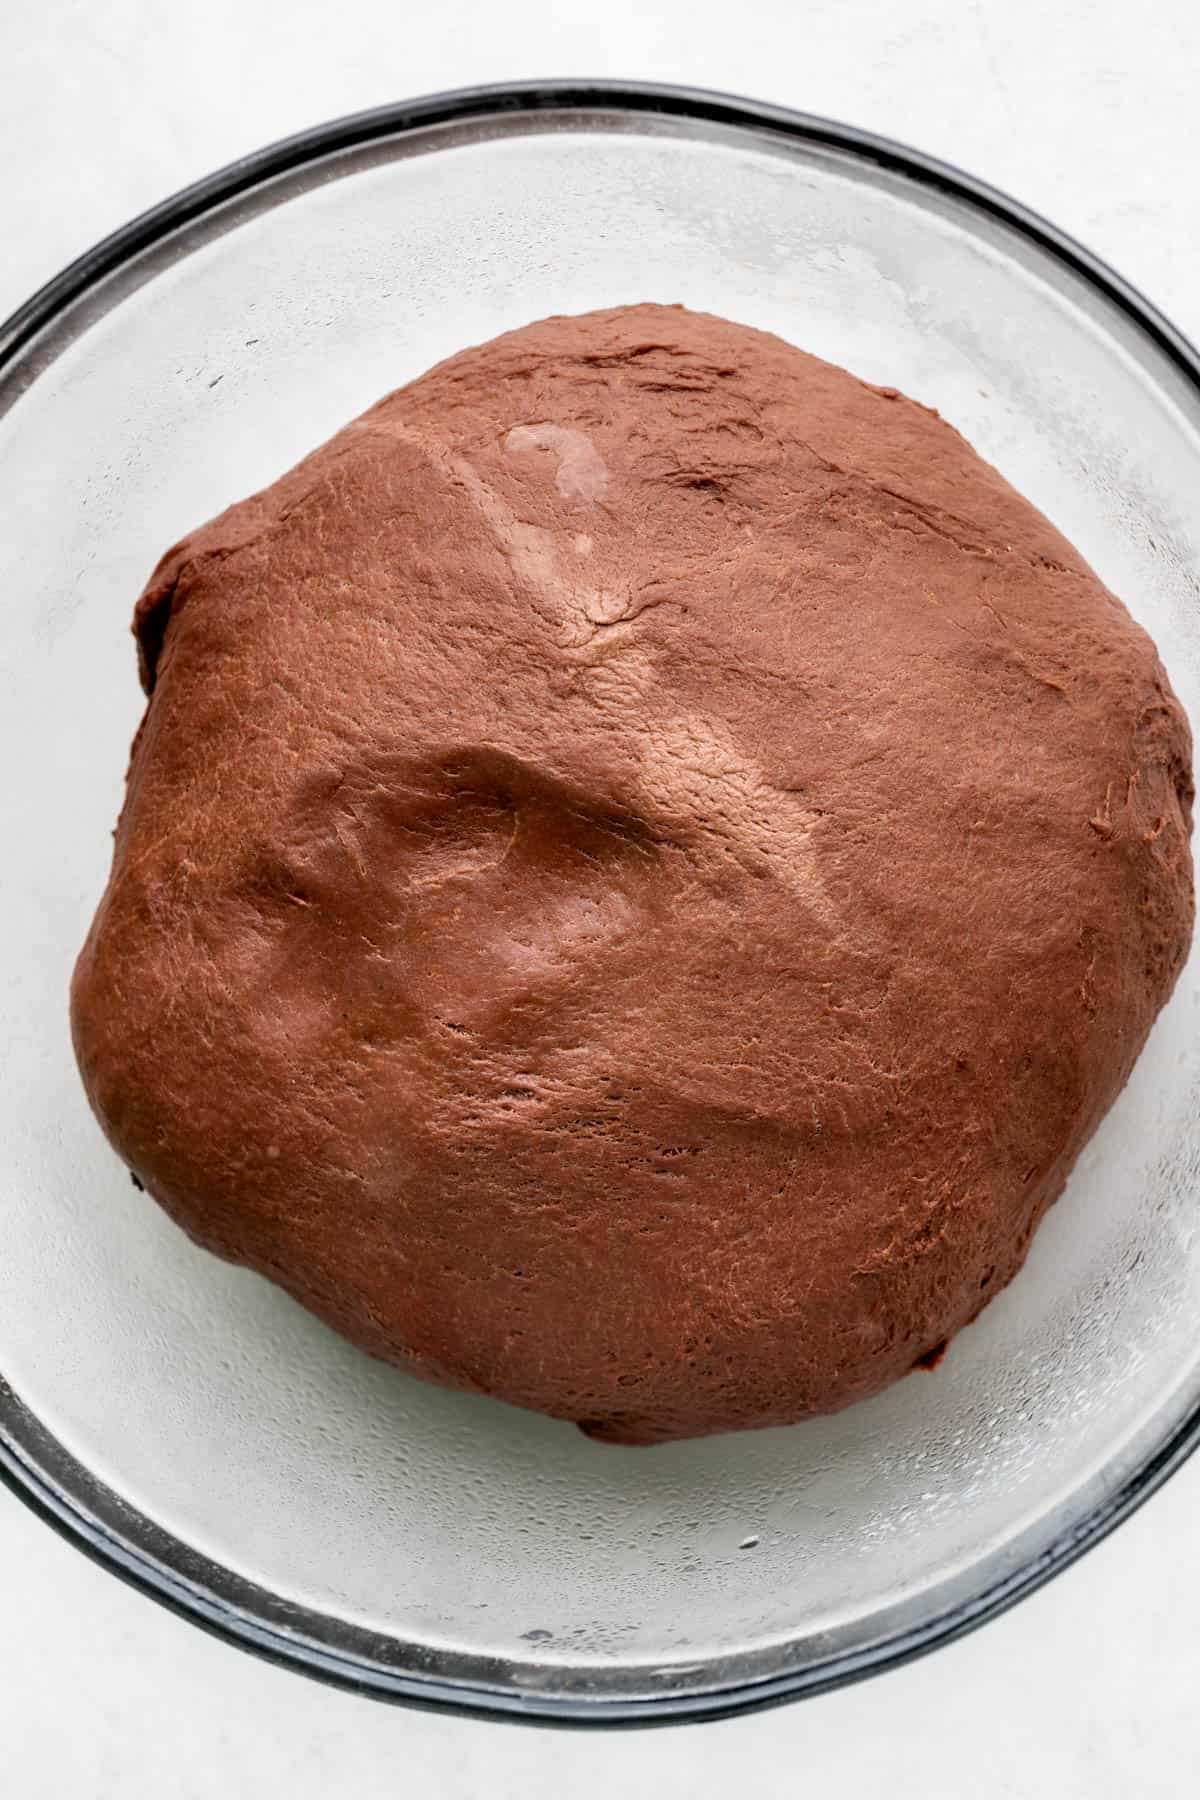 Raised chocolate dough in a glass bowl.